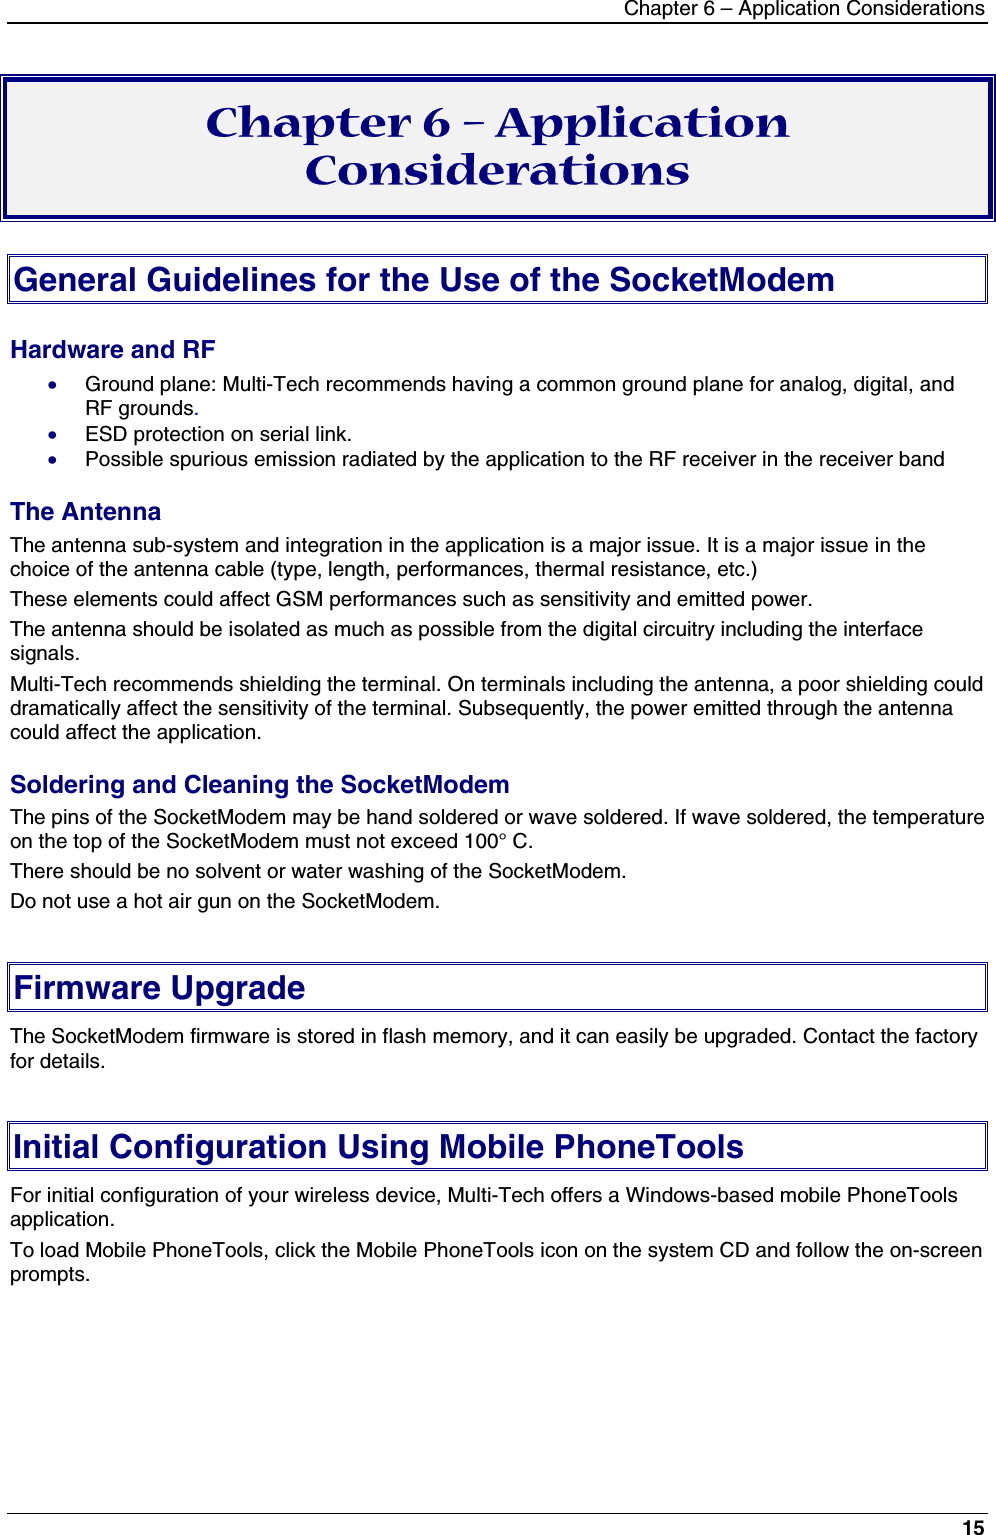 Chapter 6 – Application Considerations15Chapter 6 – ApplicationConsiderationsGeneral Guidelines for the Use of the SocketModemHardware and RF· Ground plane: Multi-Tech recommends having a common ground plane for analog, digital, andRF grounds.· ESD protection on serial link.· Possible spurious emission radiated by the application to the RF receiver in the receiver bandThe AntennaThe antenna sub-system and integration in the application is a major issue. It is a major issue in thechoice of the antenna cable (type, length, performances, thermal resistance, etc.)These elements could affect GSM performances such as sensitivity and emitted power.The antenna should be isolated as much as possible from the digital circuitry including the interfacesignals.Multi-Tech recommends shielding the terminal. On terminals including the antenna, a poor shielding coulddramatically affect the sensitivity of the terminal. Subsequently, the power emitted through the antennacould affect the application.Soldering and Cleaning the SocketModemThe pins of the SocketModem may be hand soldered or wave soldered. If wave soldered, the temperatureon the top of the SocketModem must not exceed 100° C.There should be no solvent or water washing of the SocketModem.Do not use a hot air gun on the SocketModem.Firmware UpgradeThe SocketModem firmware is stored in flash memory, and it can easily be upgraded. Contact the factoryfor details.Initial Configuration Using Mobile PhoneToolsFor initial configuration of your wireless device, Multi-Tech offers a Windows-based mobile PhoneToolsapplication.To load Mobile PhoneTools, click the Mobile PhoneTools icon on the system CD and follow the on-screenprompts.